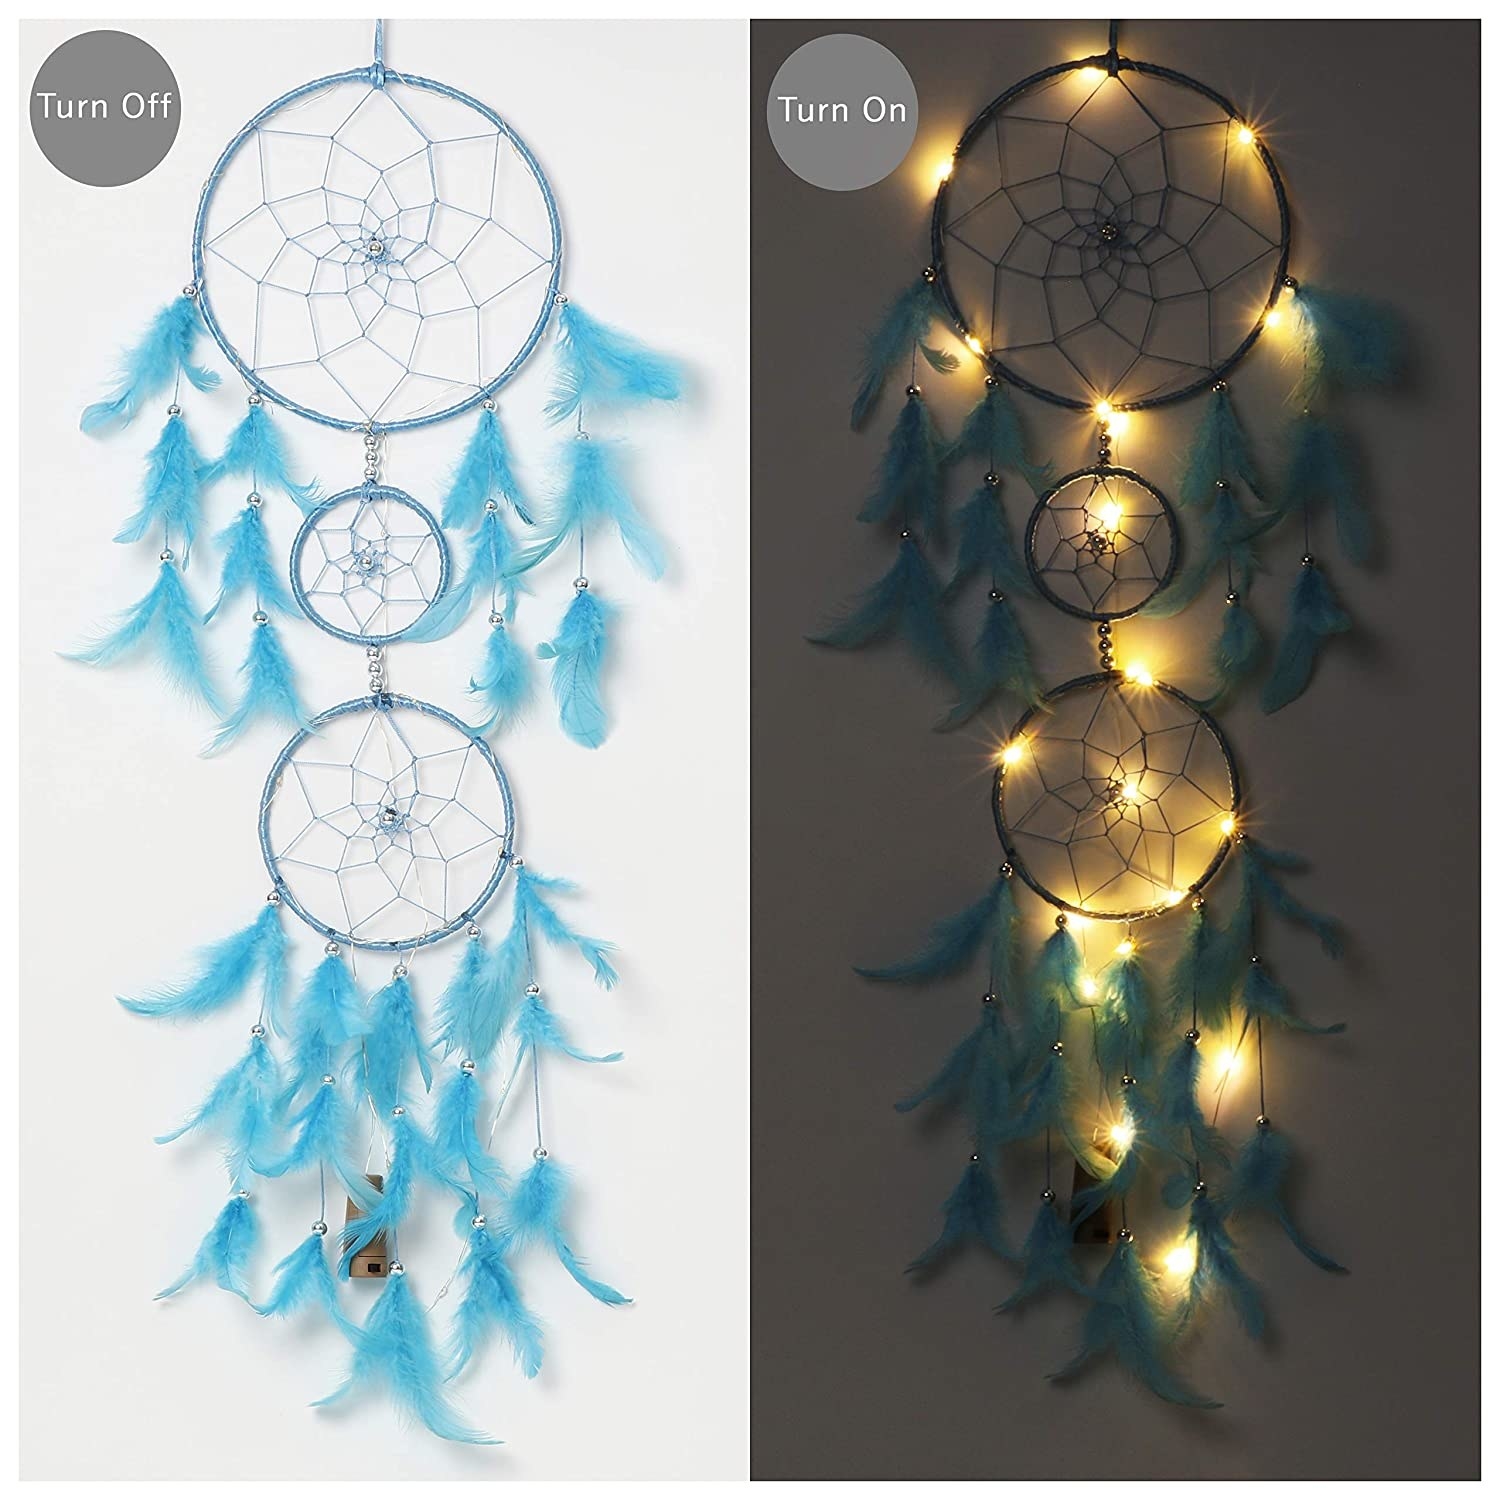 A collage of the dreamcatcher with and without the fairy lights turned on